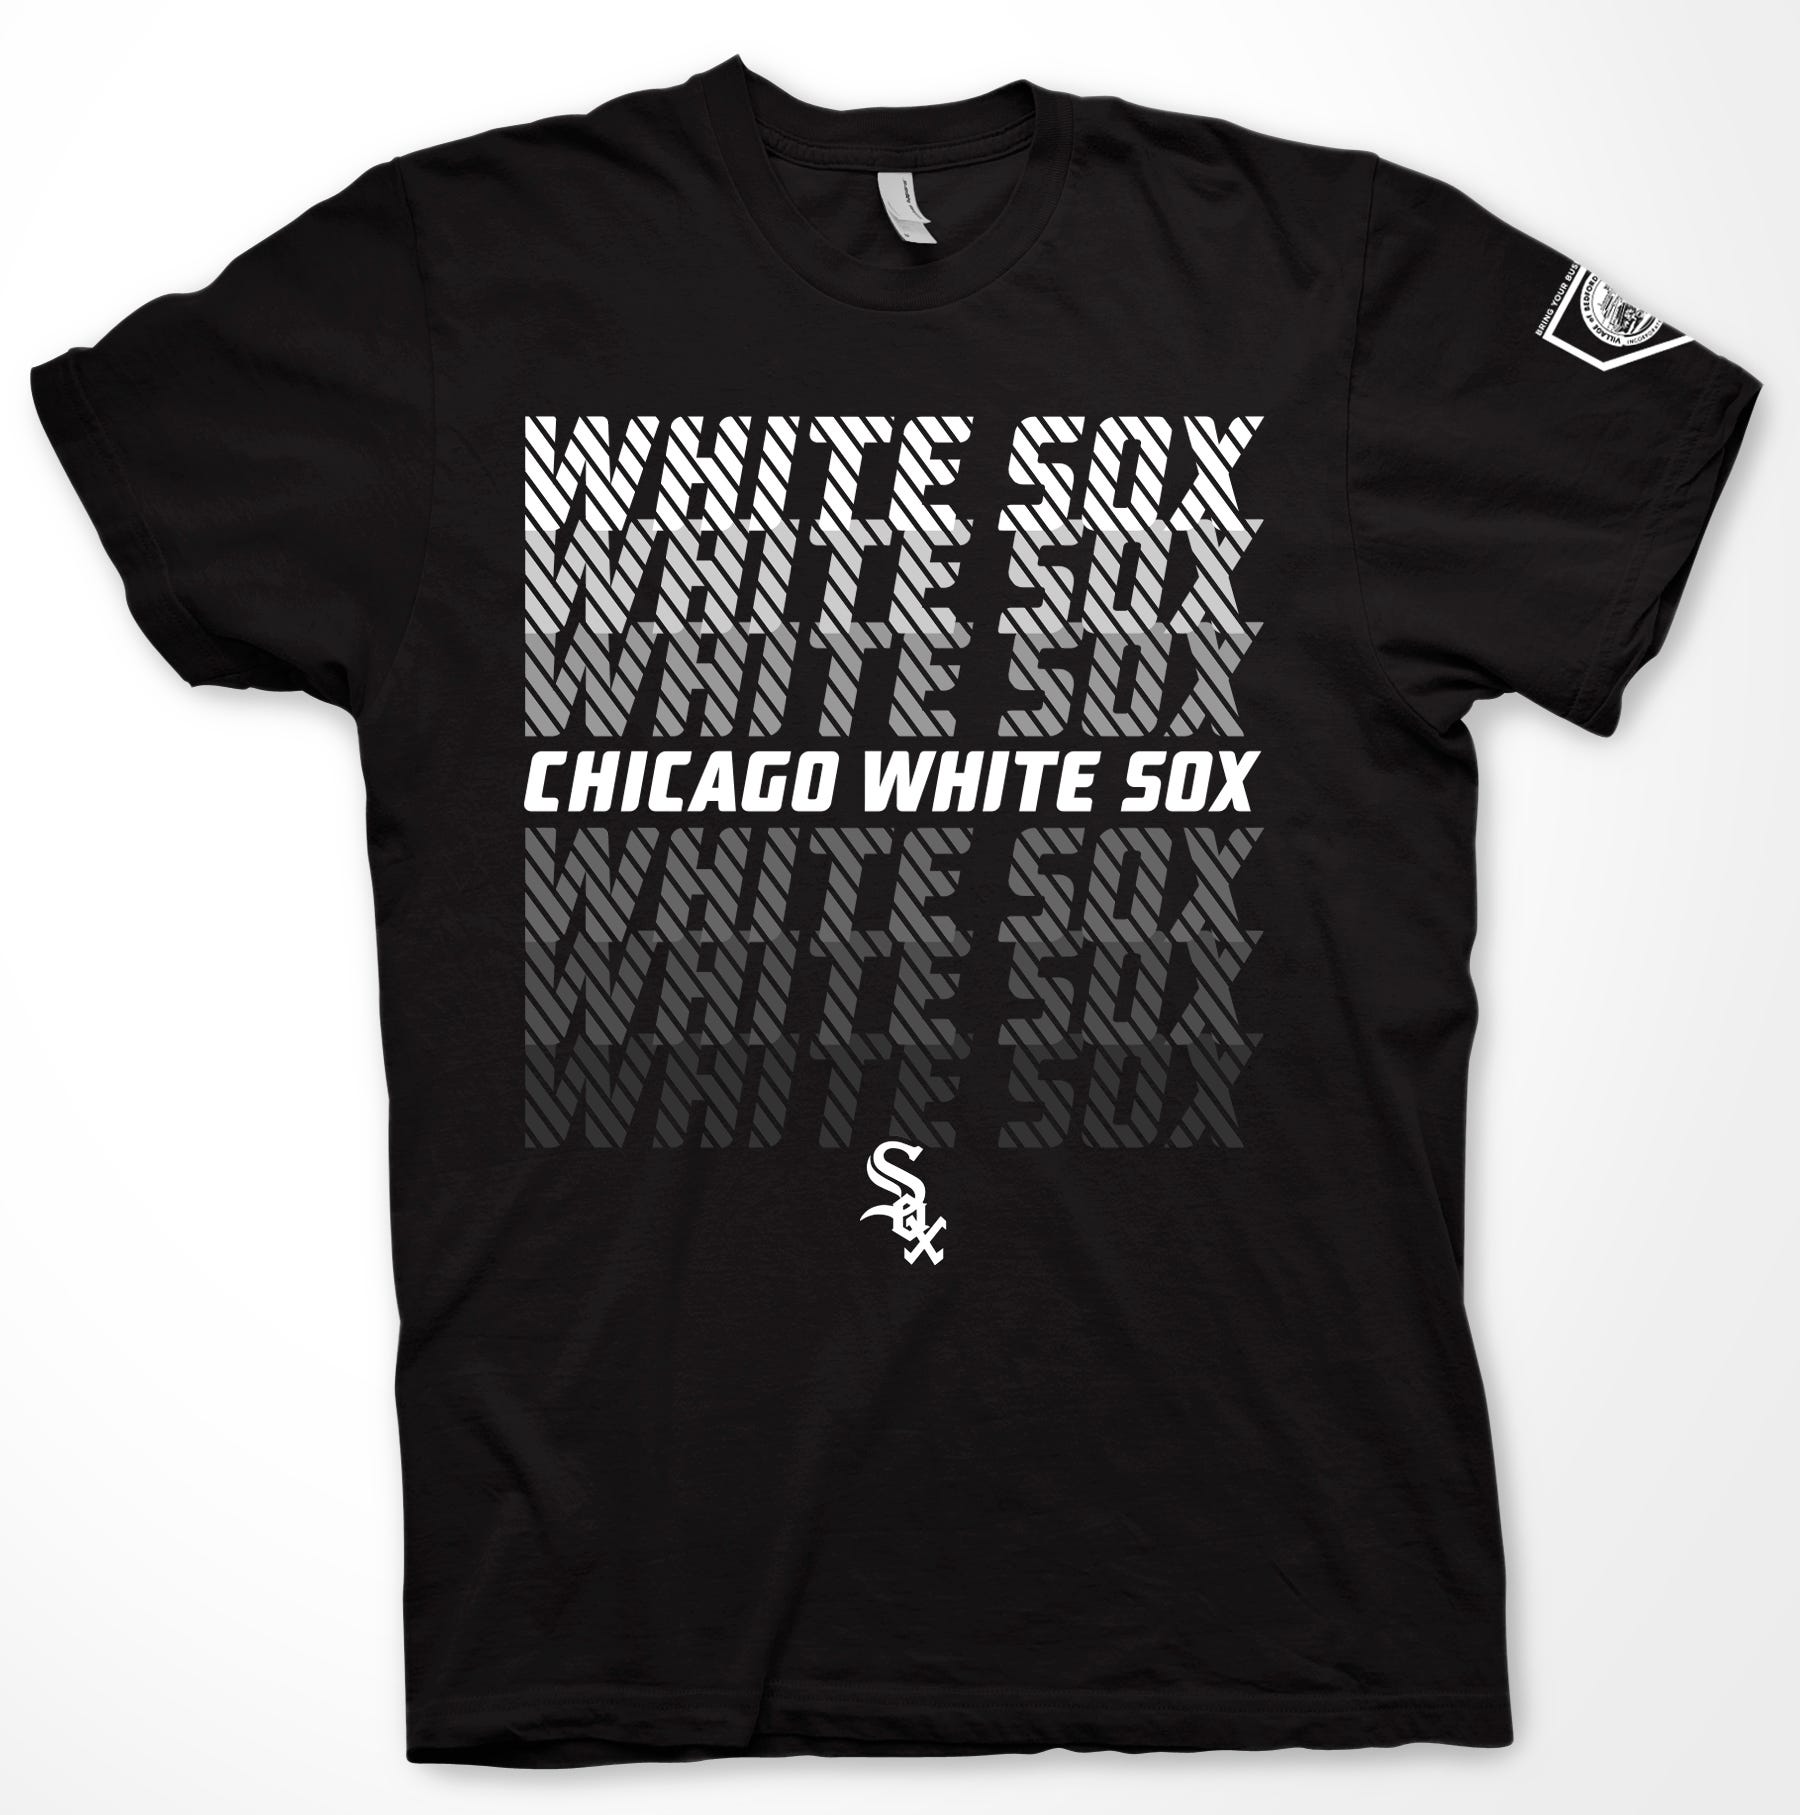 los white sox soccer jersey 2019